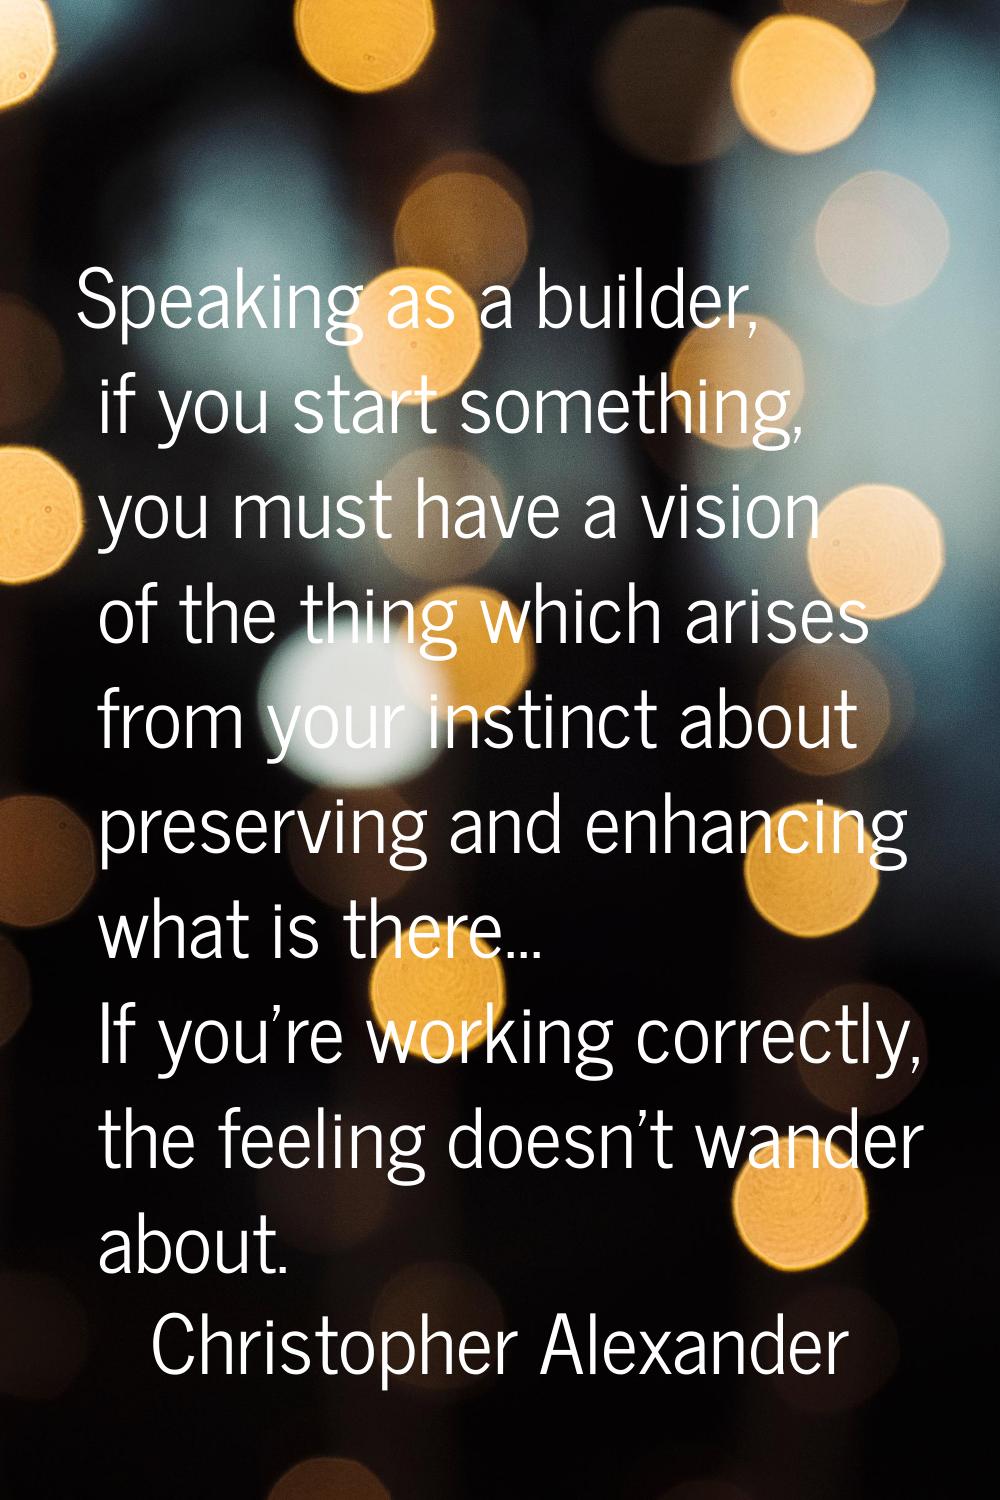 Speaking as a builder, if you start something, you must have a vision of the thing which arises fro